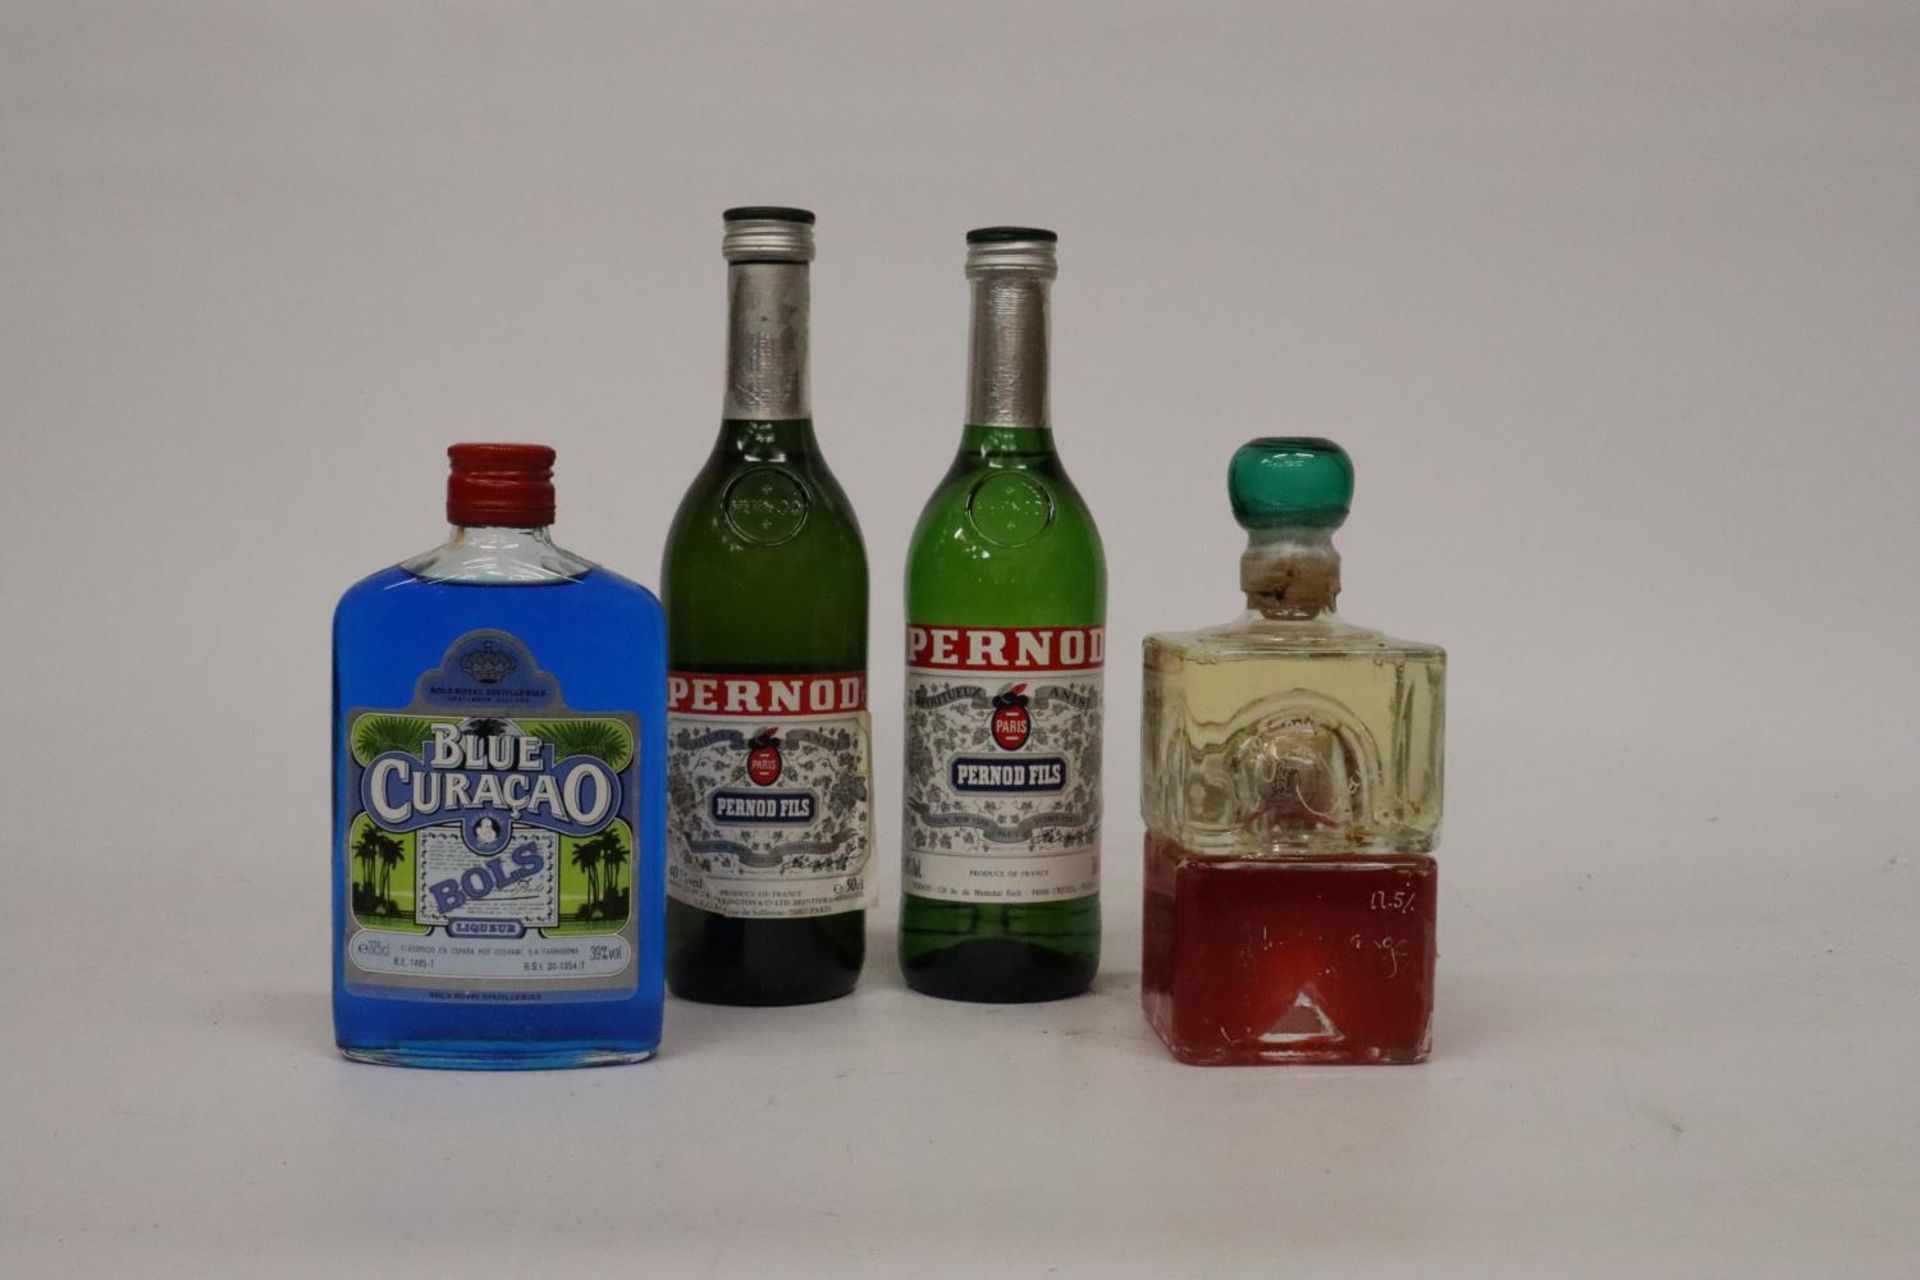 TWO 50CL BOTTLES OF PERNOD FILS, A 37.5CL BOTTLE OF BLUE CURACAO AND A BOTTLE OF